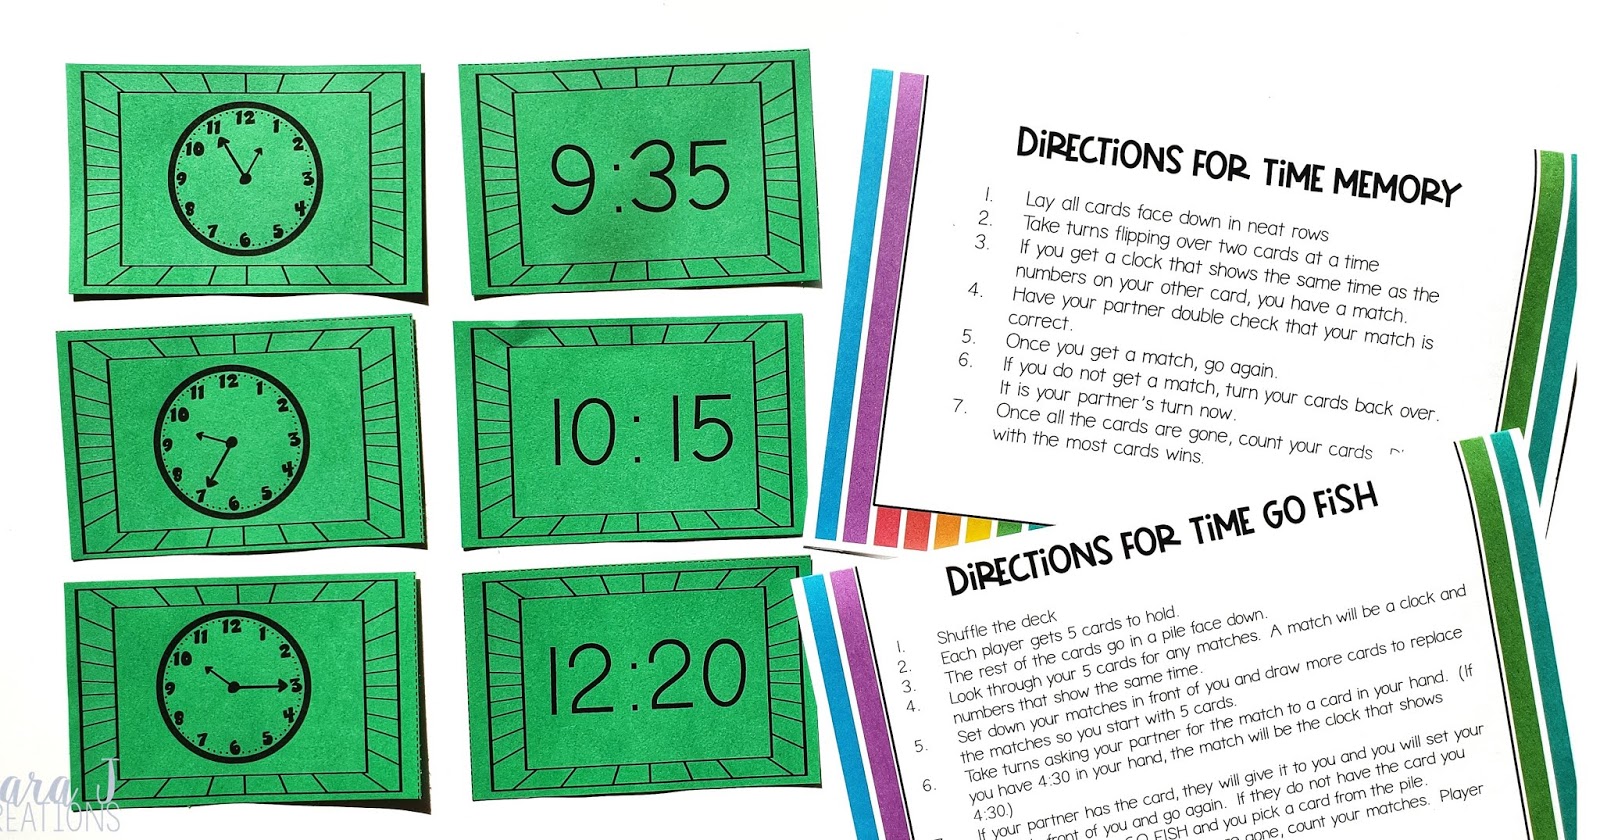 Make teaching telling time more fun and hands-on with these telling time math centers. Eight ready to go centers that have minimal prep, but maximum fun. Students practice reading a clock through games, task cards, puzzles, matching activities, interactive notebooks, and more. These activities are designed for 2nd grade, but could be adapted for first grade or even 3rd grade. 